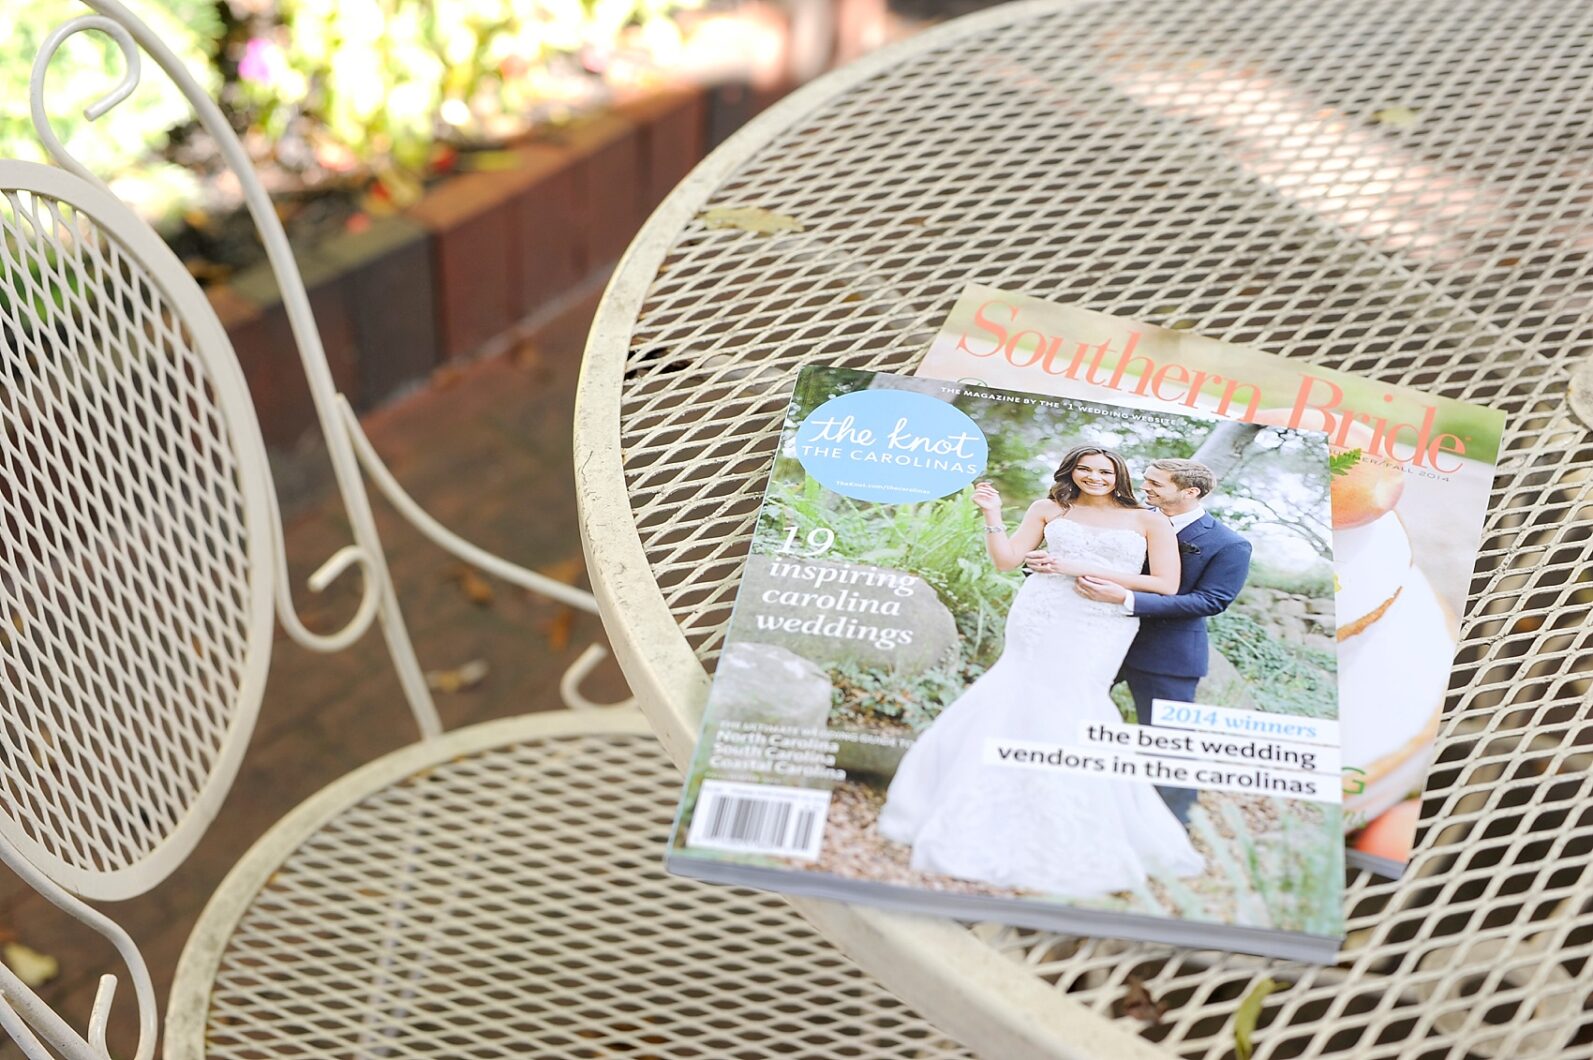 Southern wedding magazines The Knot and Southern Bride. Photo by Mikkel Paige Photography.